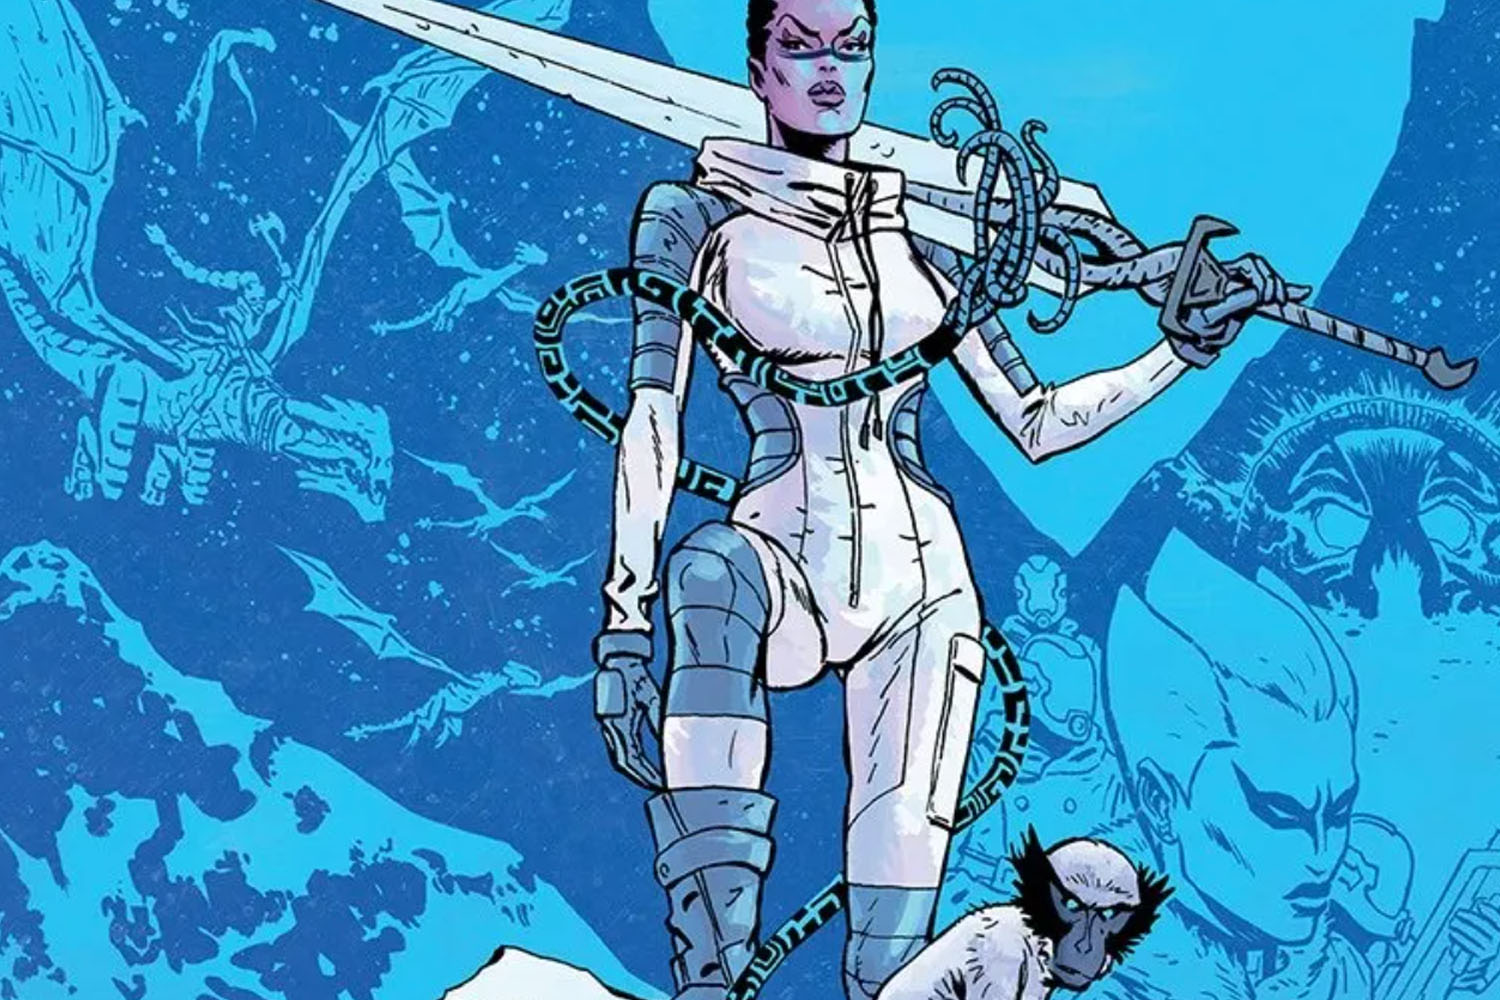 'Everfrost' #1 creates a bold and daring new world